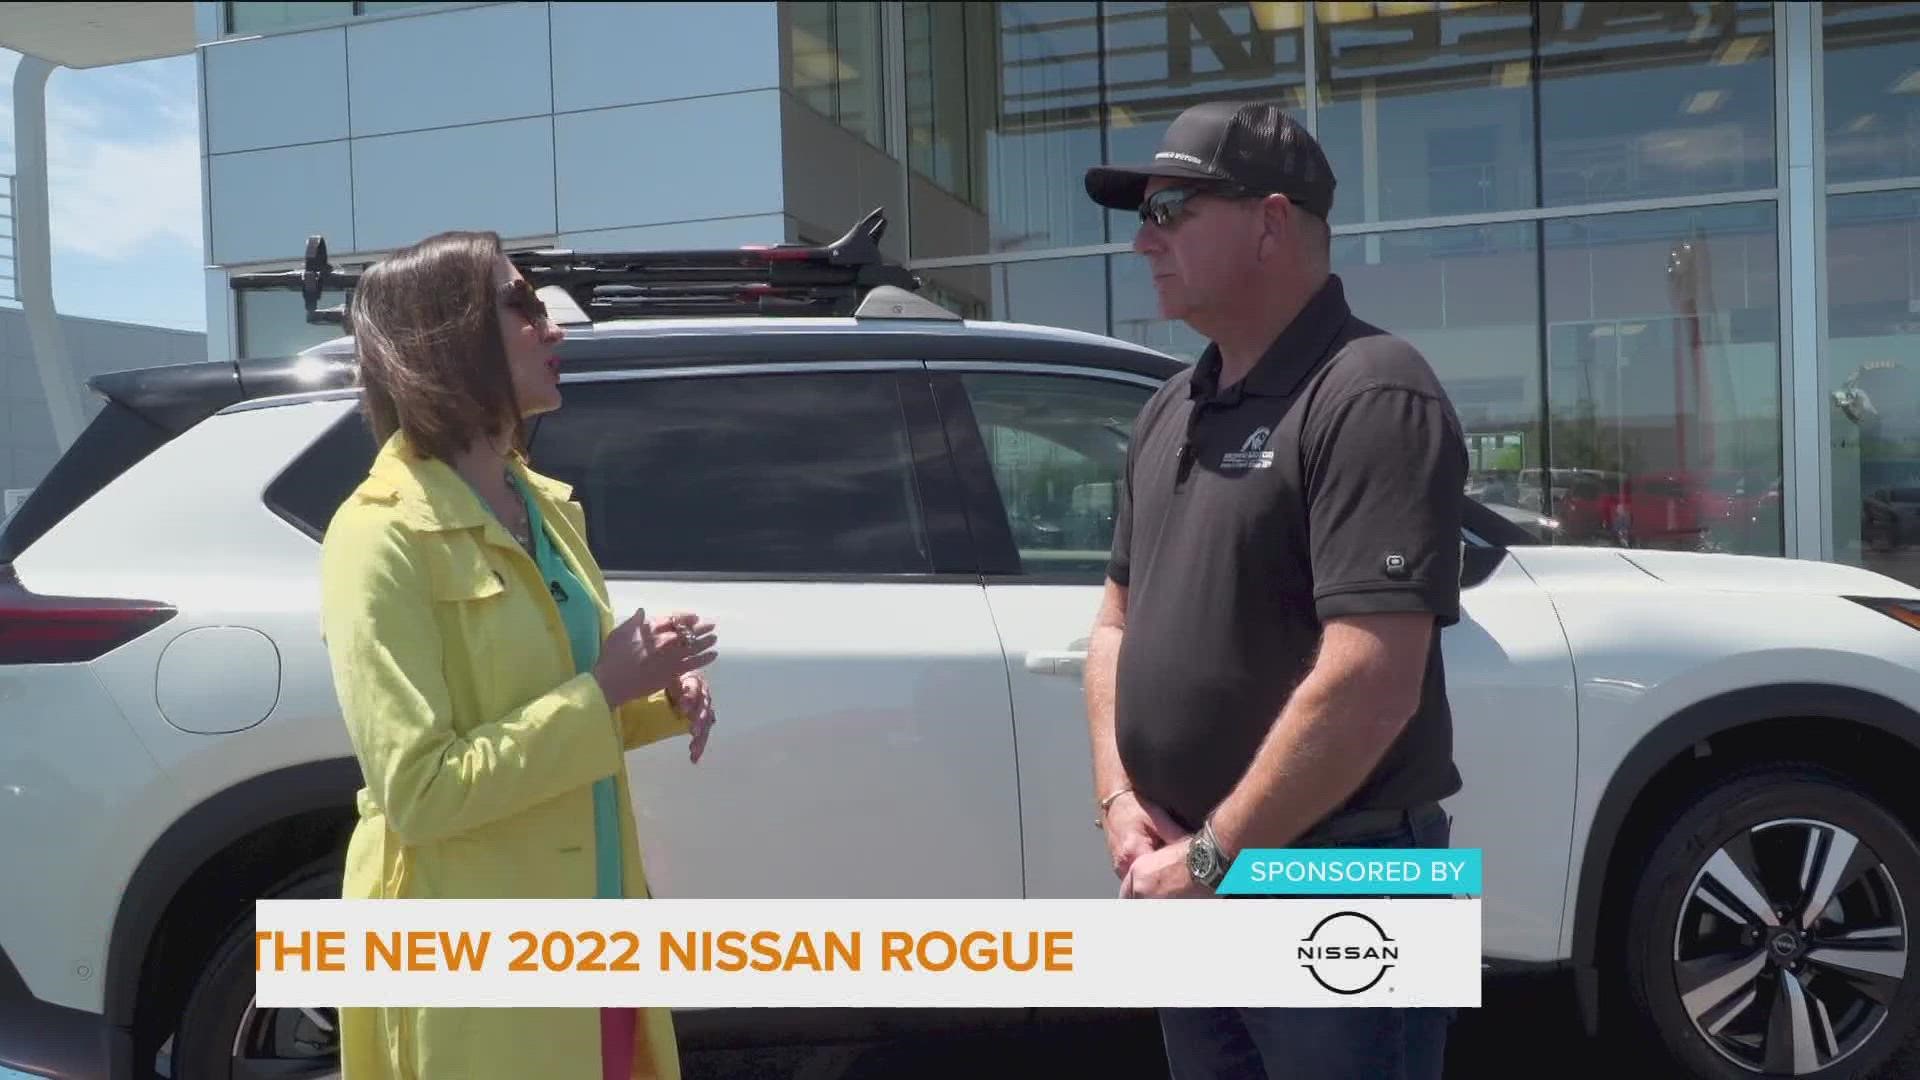 Sponsored by Nissan. Be worry free with the gas mileage on a Nissan Rogue.